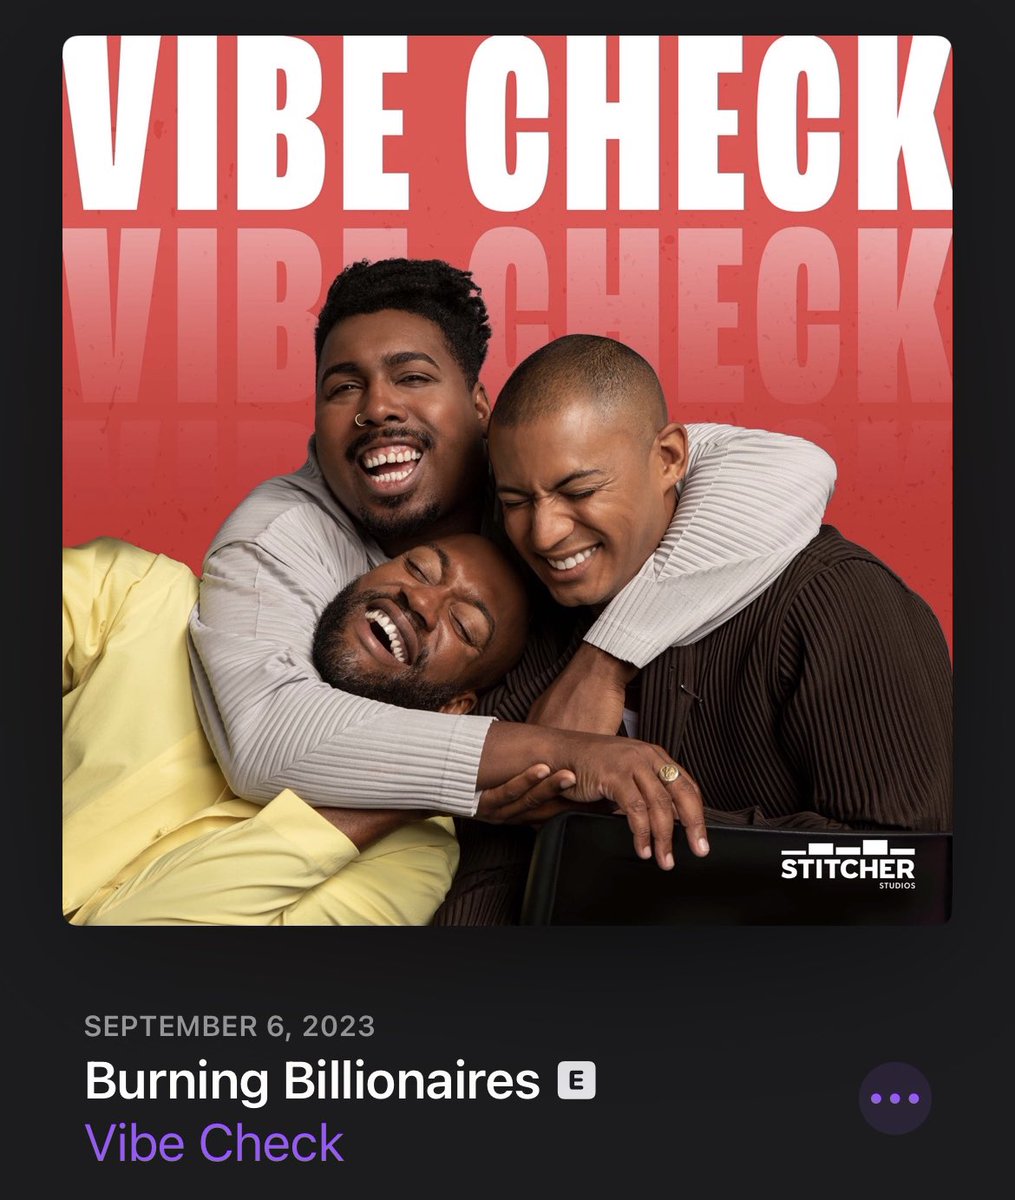 Today’s episode of #VibeCheckPod really cemented that one of my favorite things about the show is hearing a group of men take delight in truly celebrating art that is created by women, ostensibly for women.